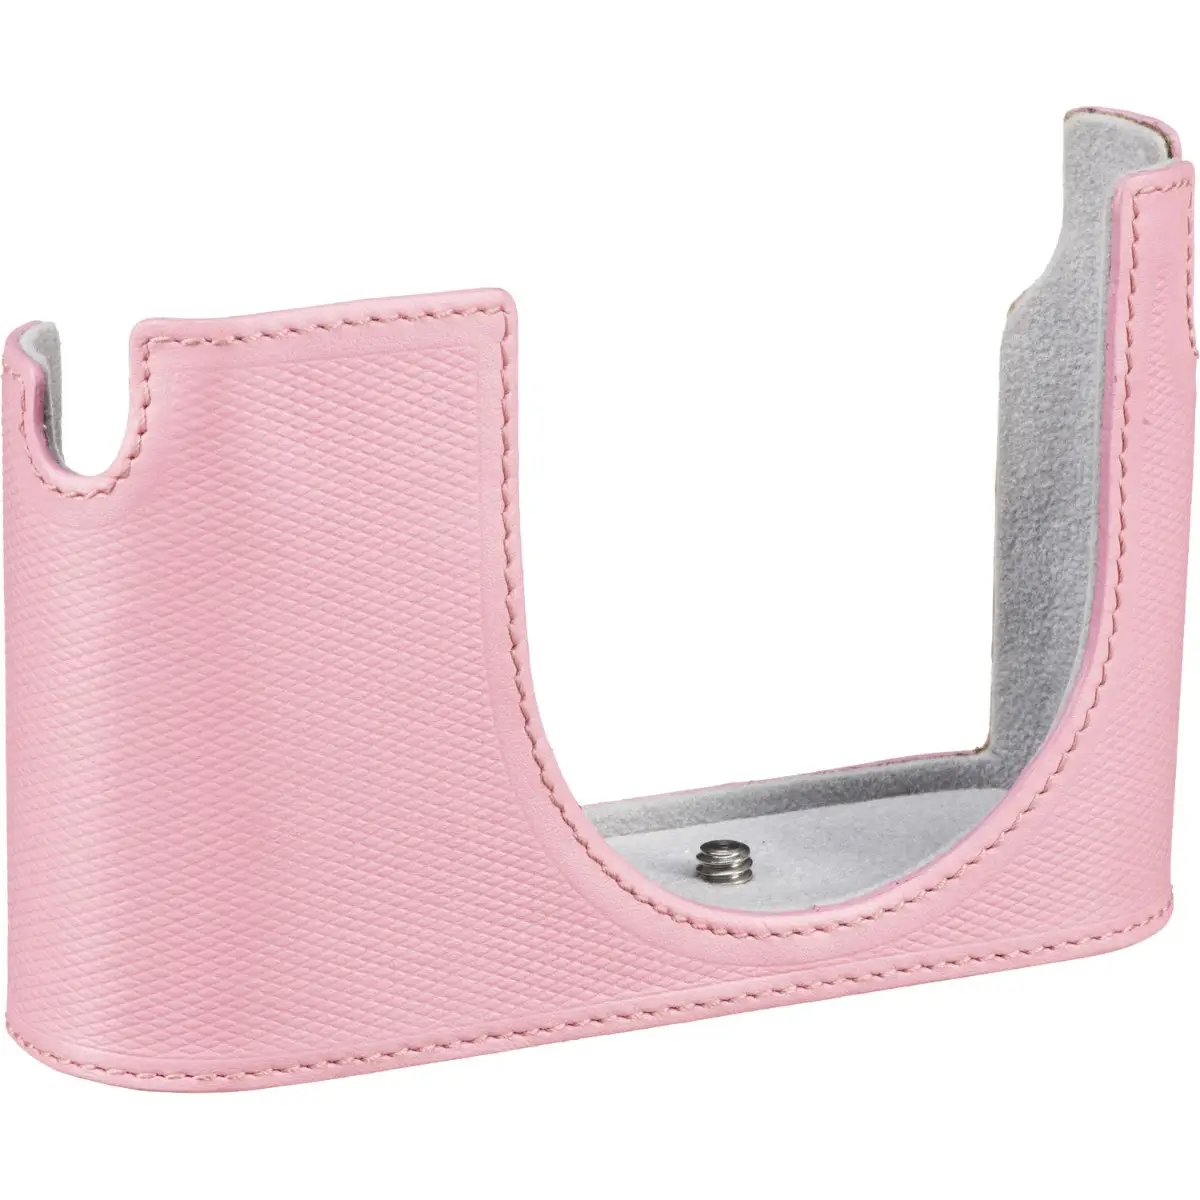 Leica Q2 Protector Case (Pink)